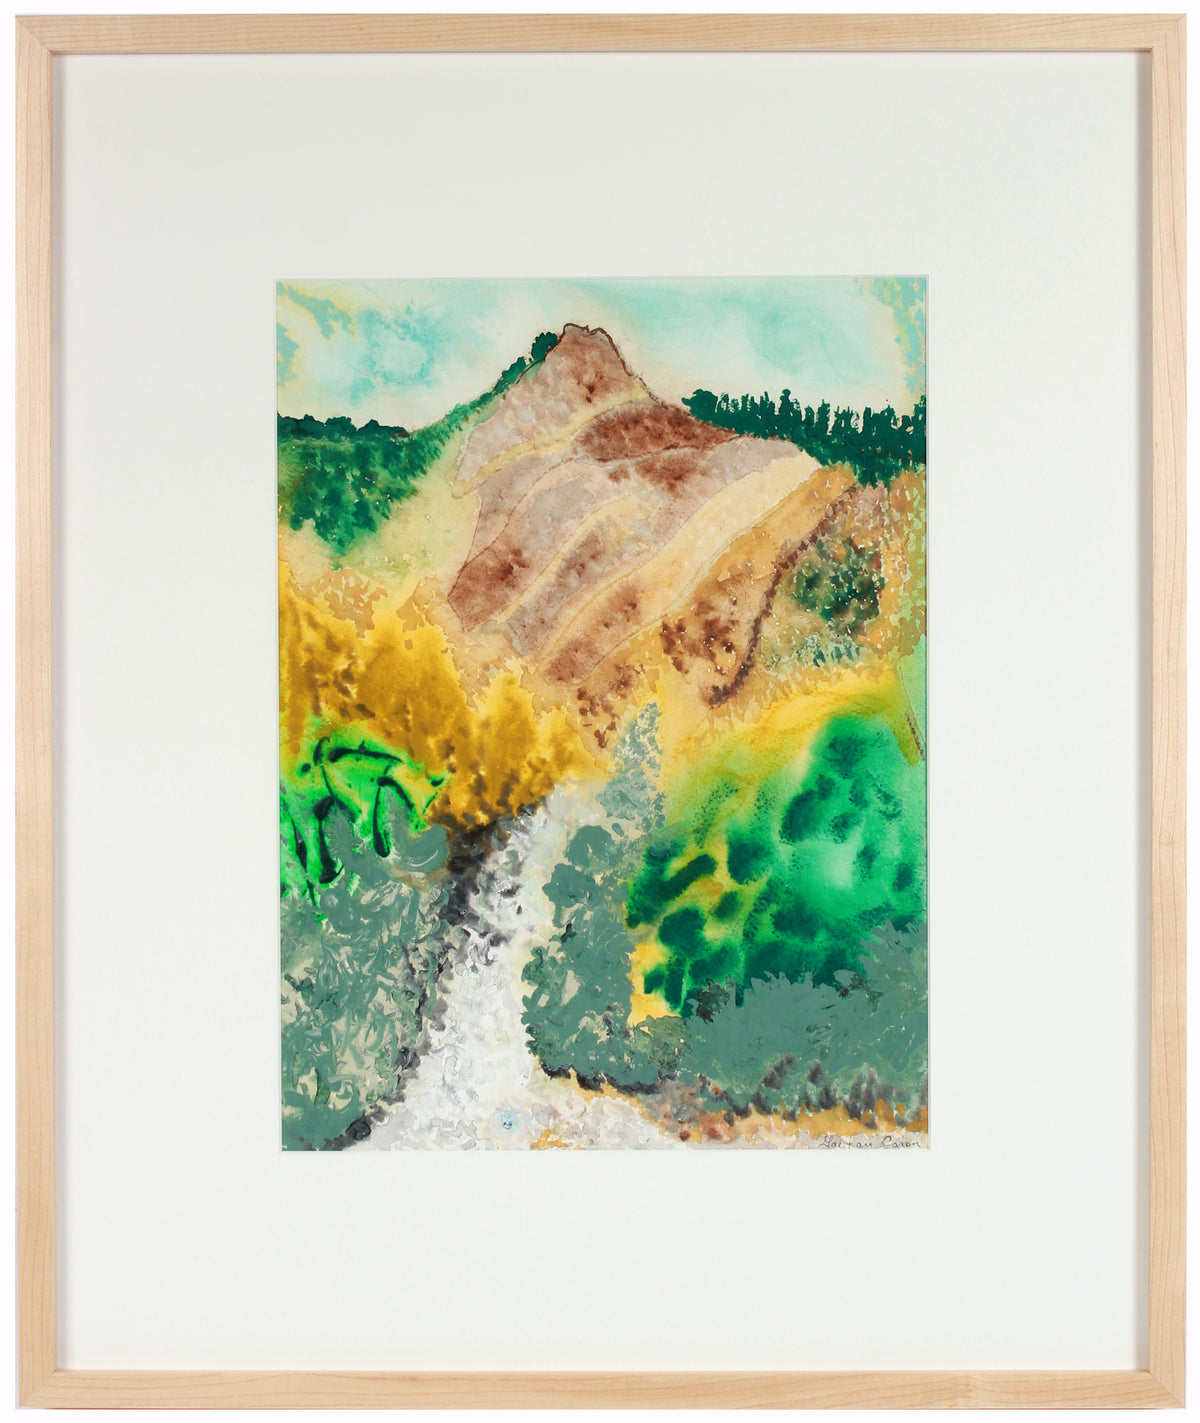 &lt;i&gt;Dry Creek&lt;/i&gt; &lt;br&gt;2018 Mixed Media &lt;br&gt;&lt;br&gt;#A6528